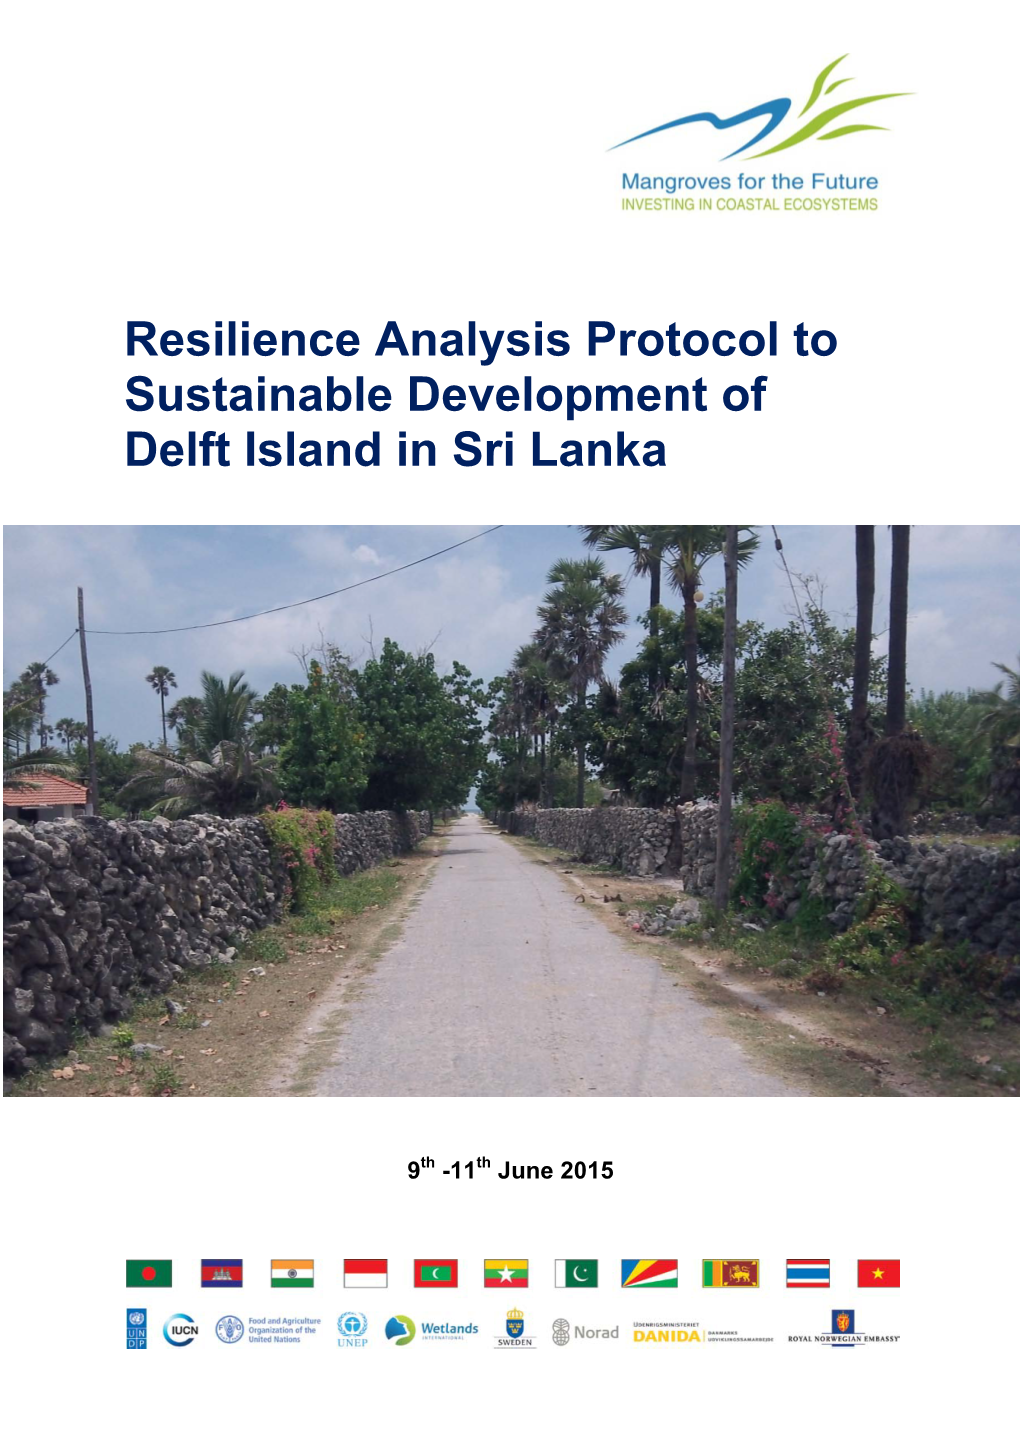 Resilience Analysis Protocol to Sustainable Development of Delft Island in Sri Lanka